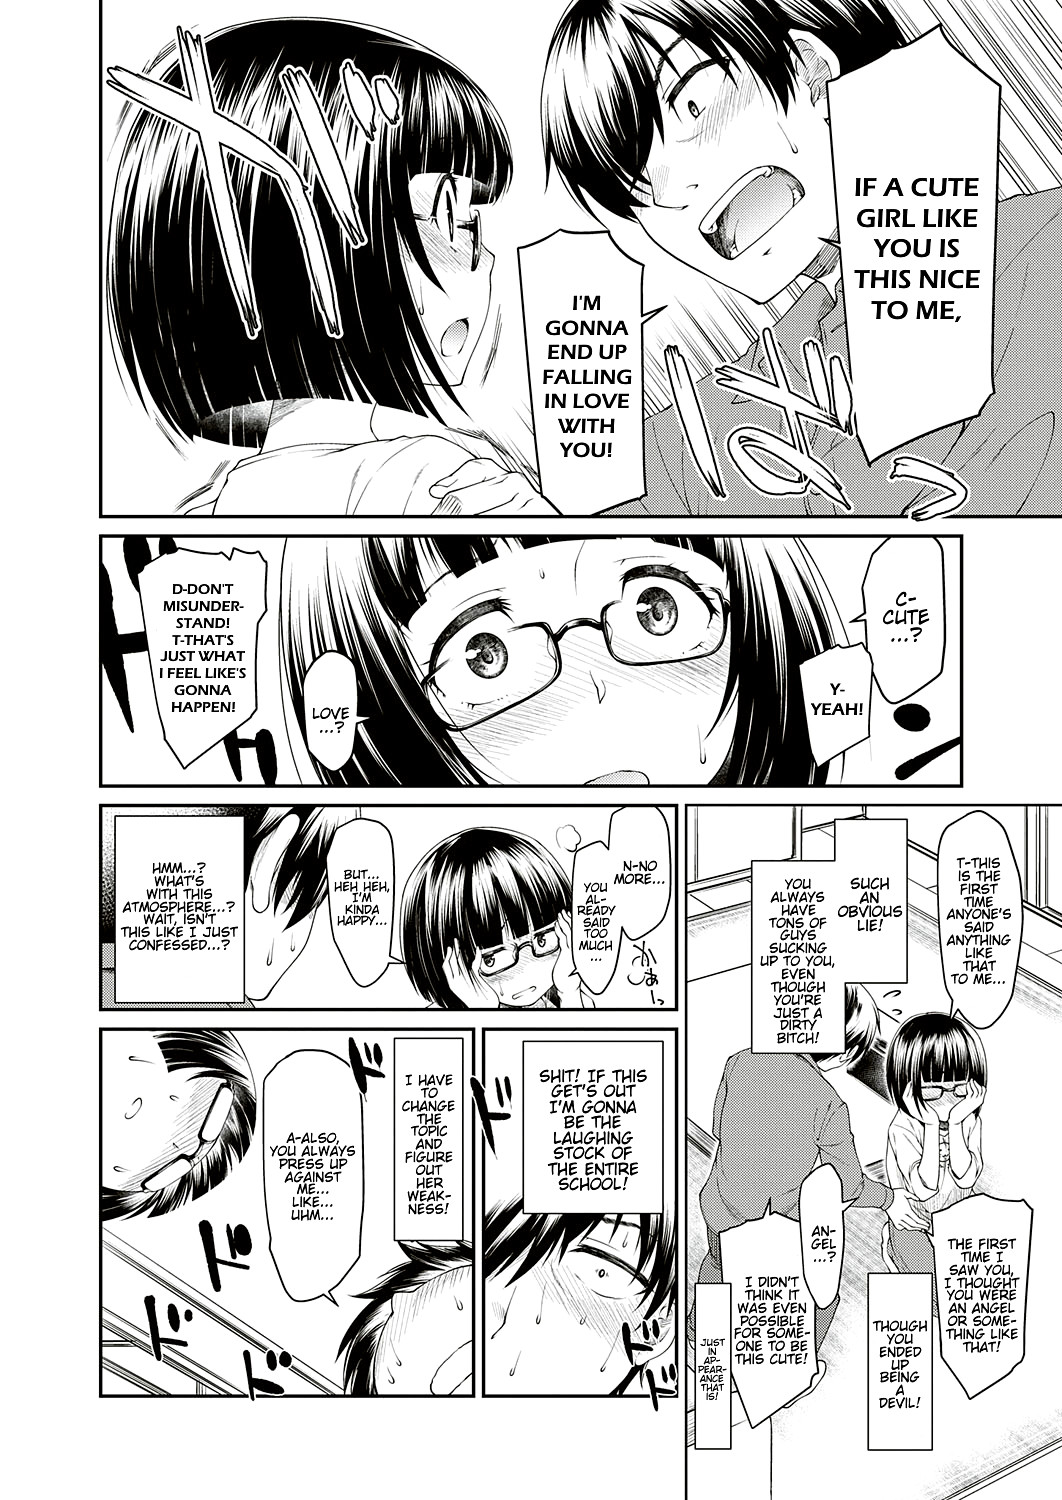 hentai manga A Story About a Girl Being Interested In a Nervous Otaku Like Me